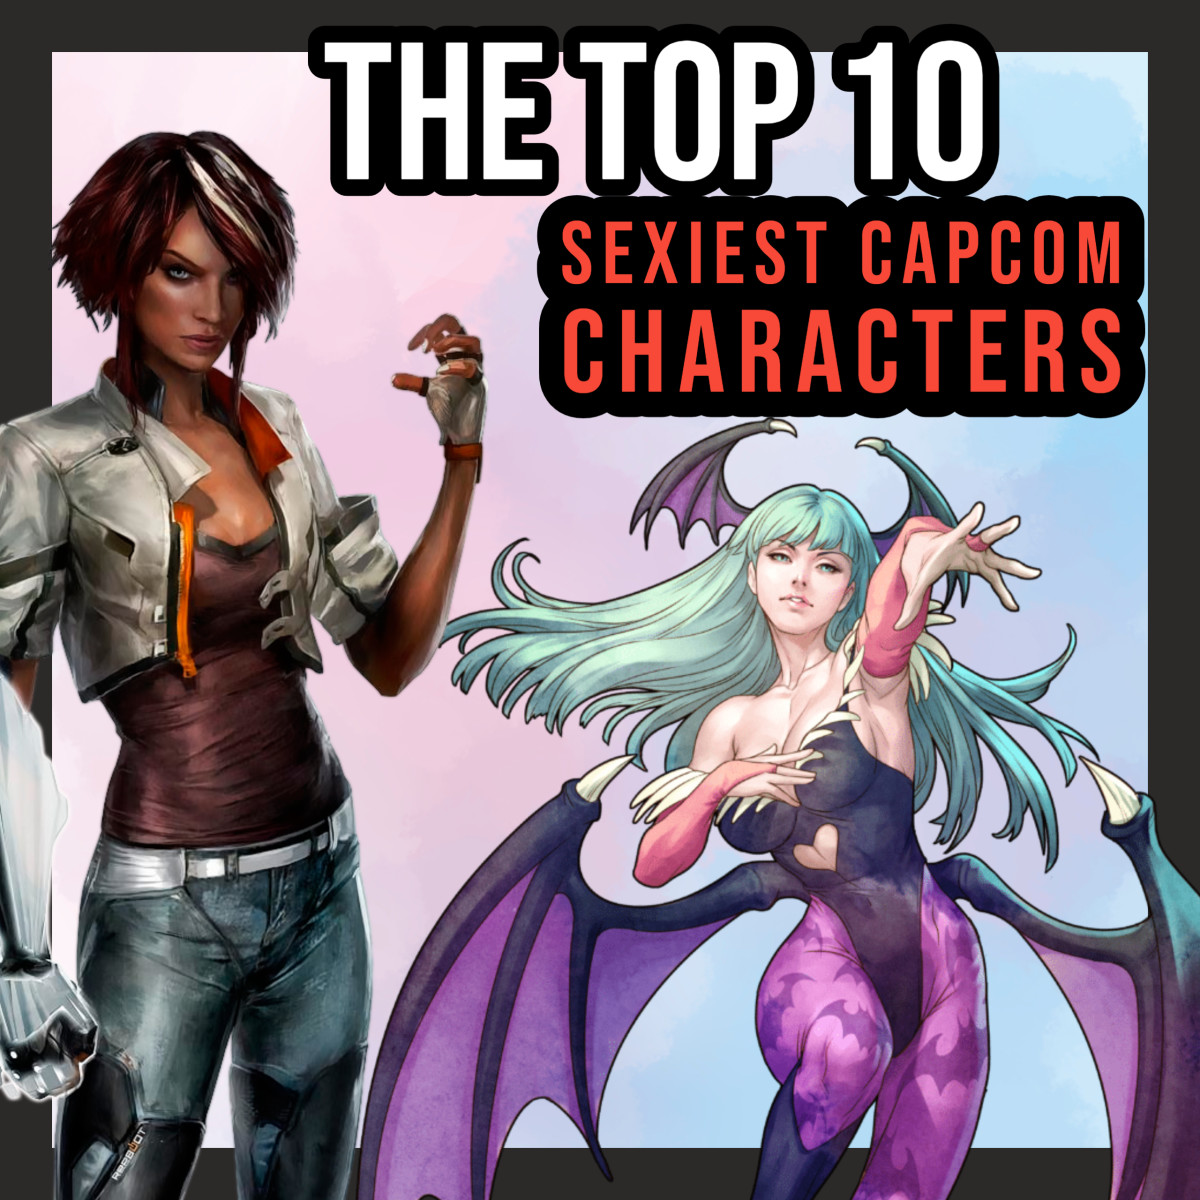 From Fiona Belli to Jill Valentine, this article ranks the 10 sexiest Capcom characters of all time. Did your favorite character make our final 10 list? Read on to find out!